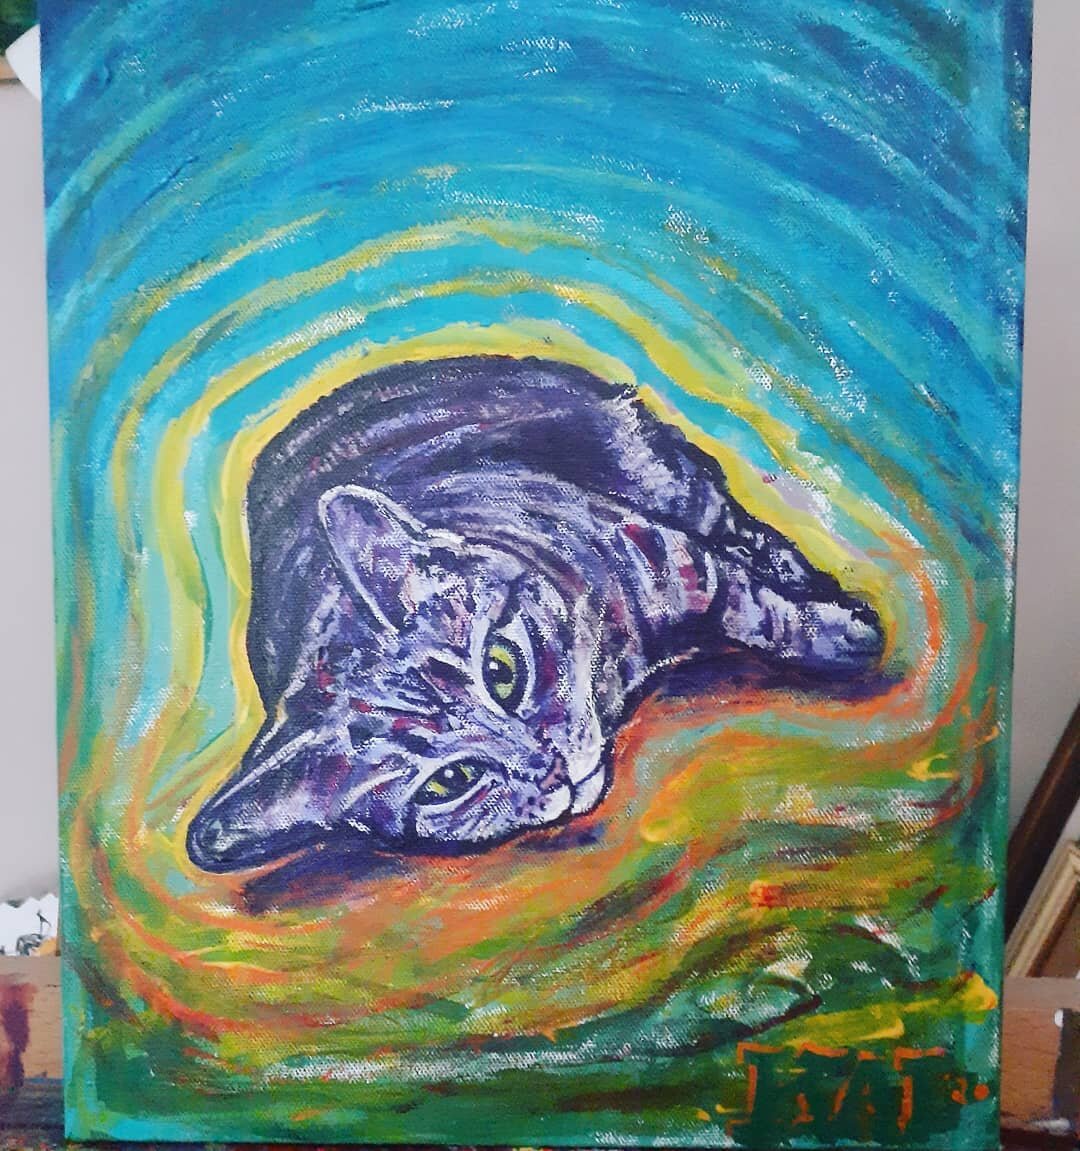 The other half for @patscousin 

#catsofinstagram #catportrait #artisfun #acrylicpainting #catpainting #pghart #kaidevenitch #artistforhire #vibe #auras #goodvibrations #awkwardpose #colors #ipaintcats #andotherthings